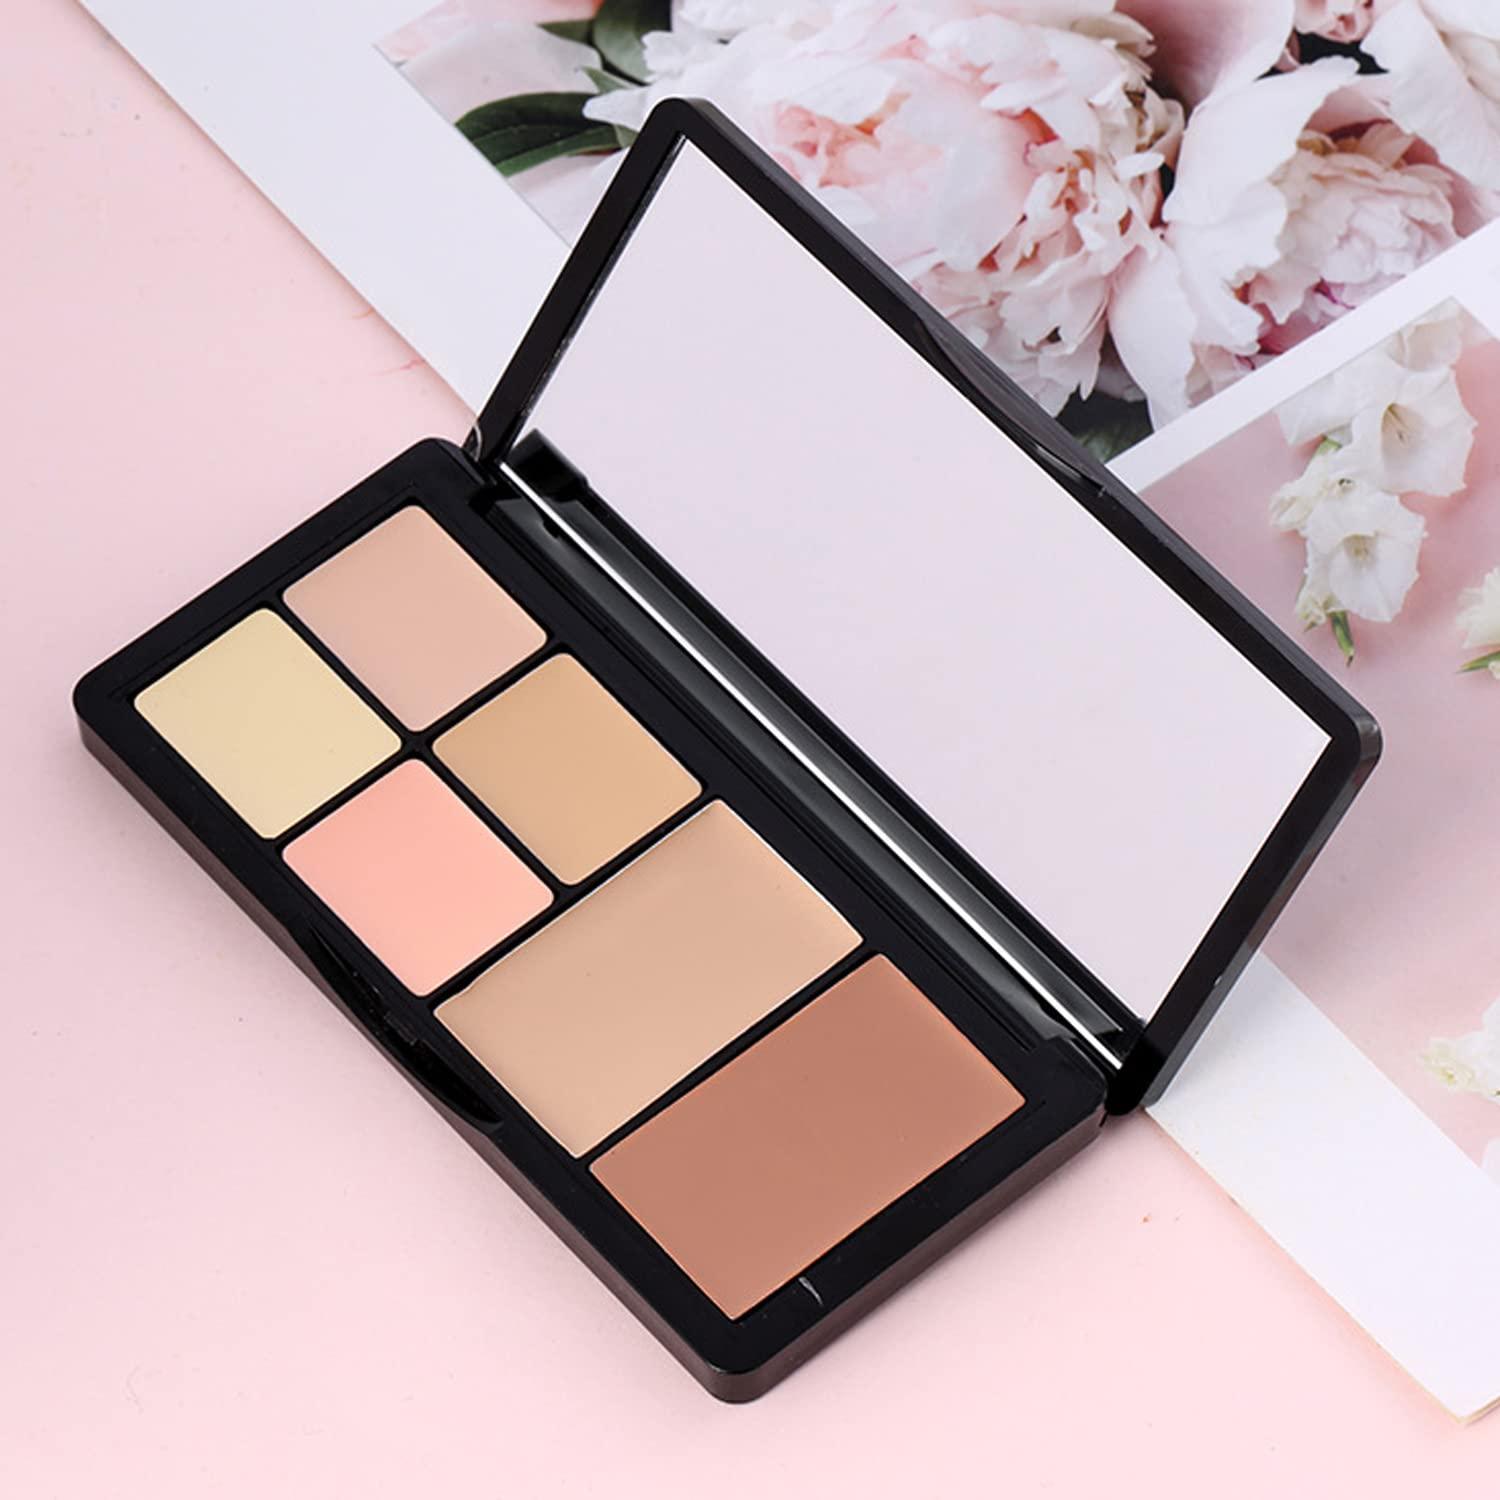 Concealer Contour Palette, 6 In 1 Color Correcting Concealer Contour Makeup  Palette, Contouring Foundation Highlighting Makeup Kit for Dark Circles